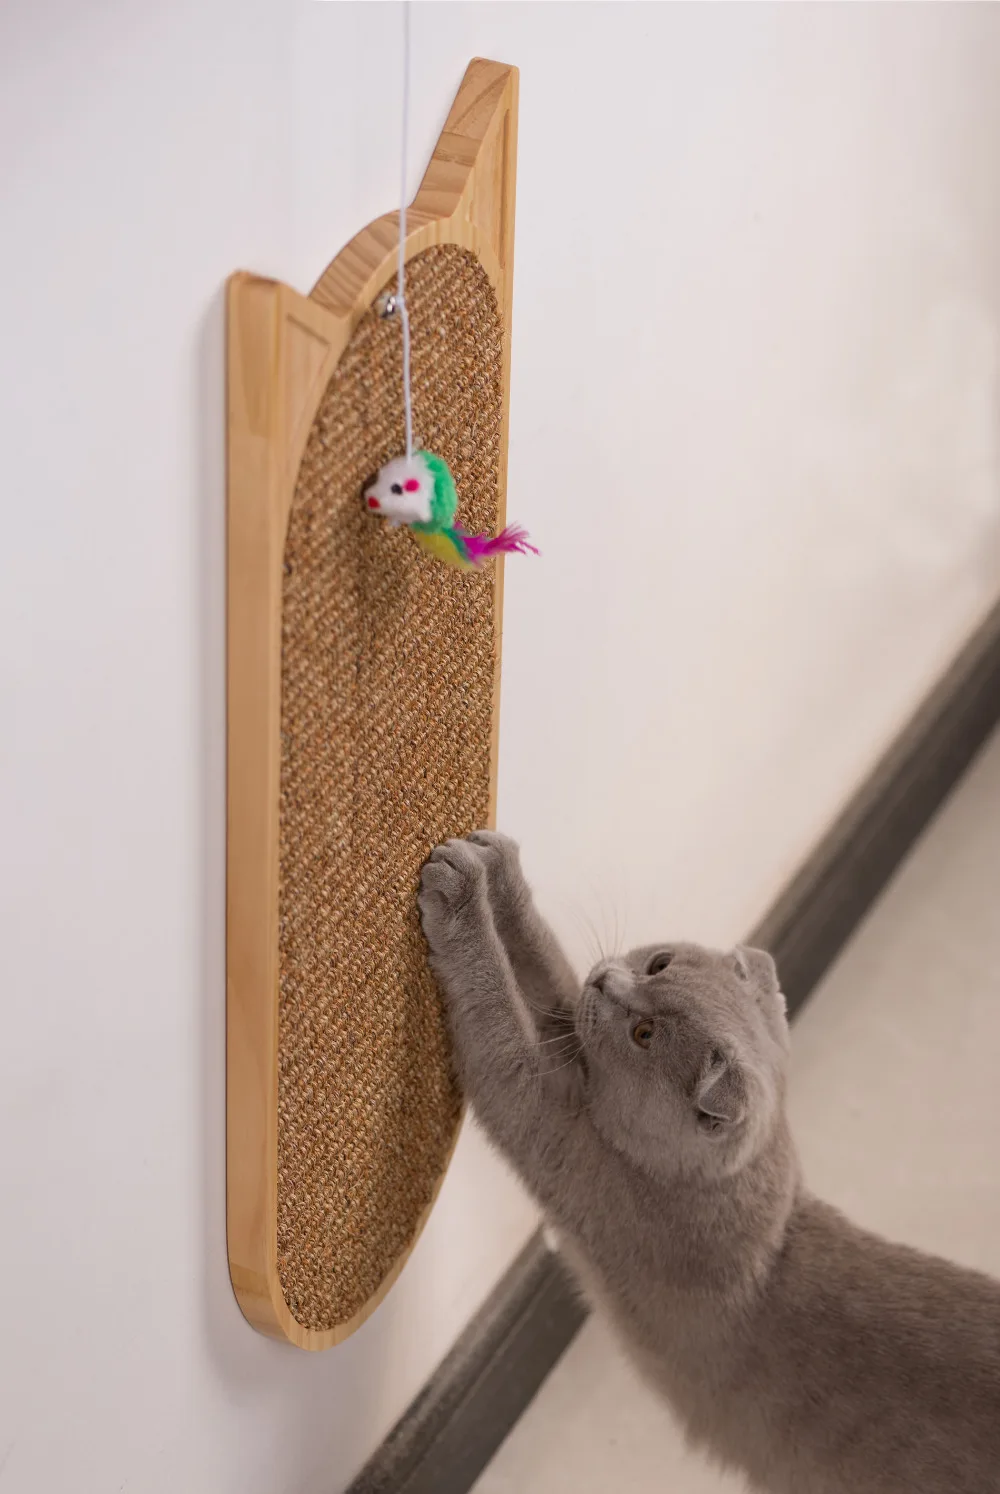 Wall Mounted Cat Scratching Post for Adult Cat Kittens,Sisal Cat Scratching Pad,Scratcher for Kitty’s Health